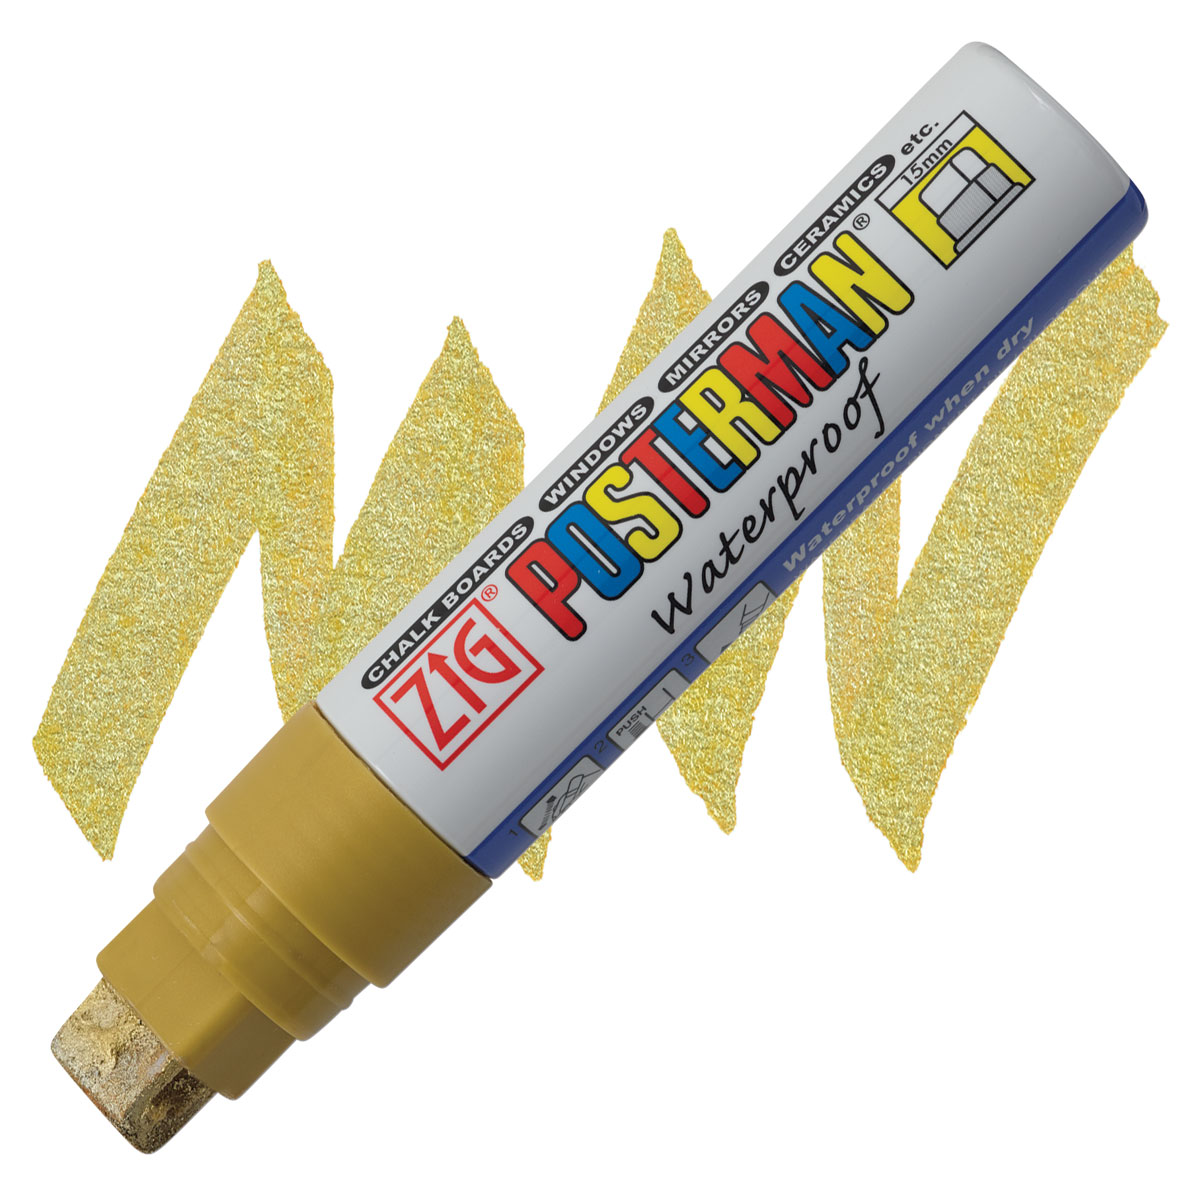 Zig Posterman Waterproof Broad 15mm Tip 5 Color Marker Kit for White  Surfaces